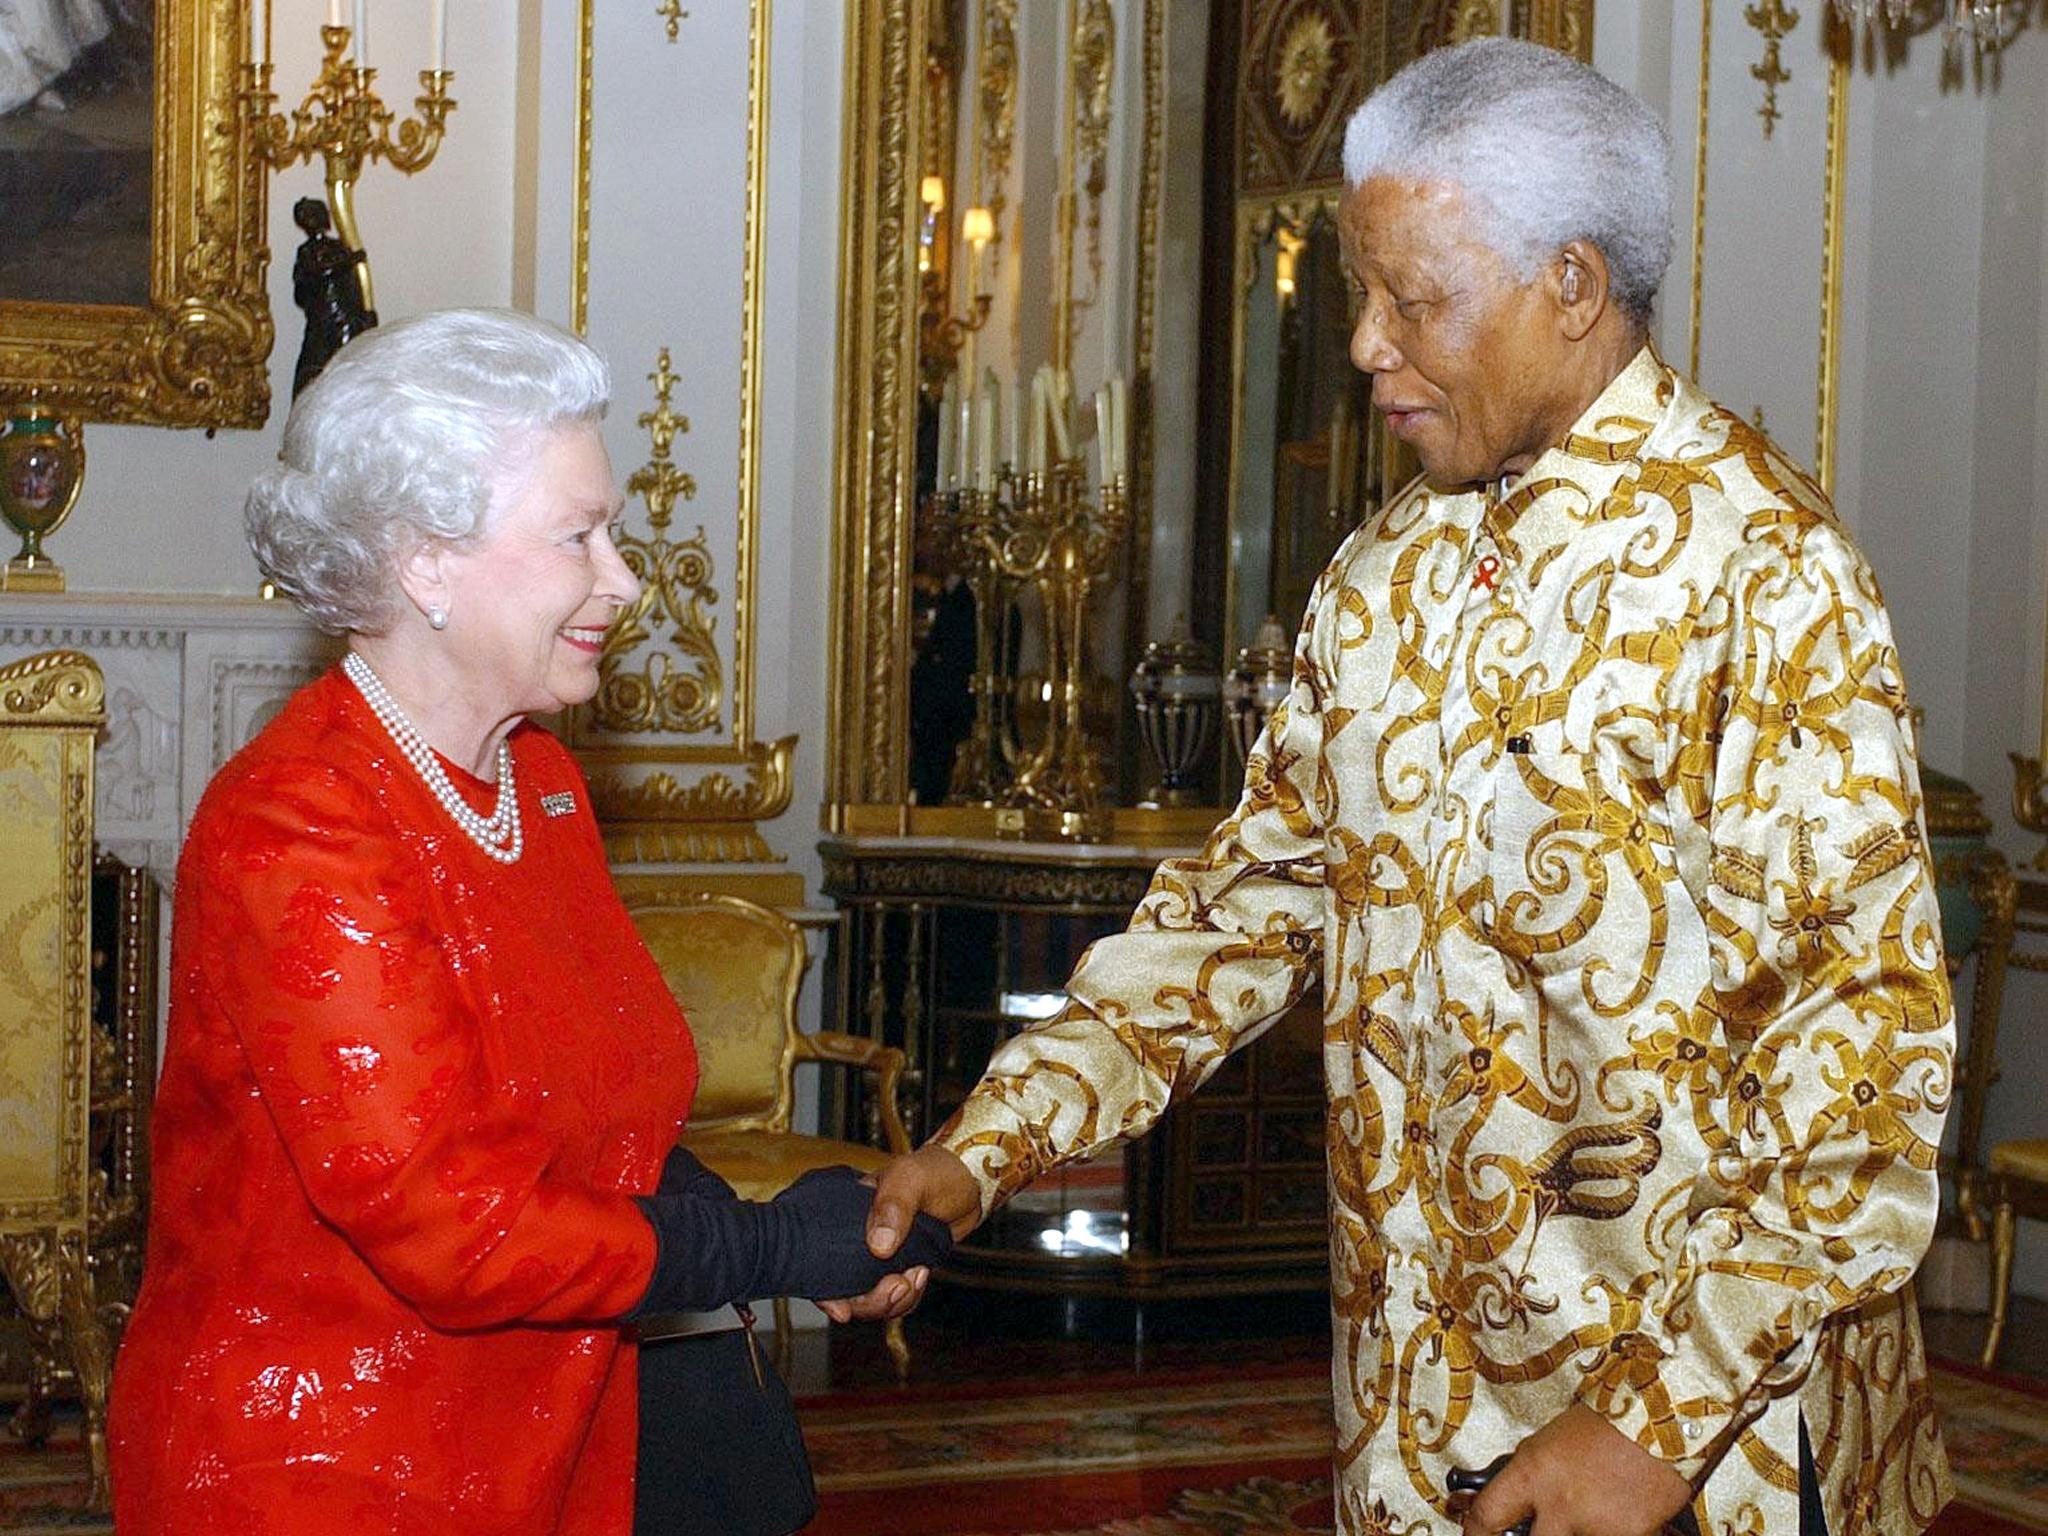 Queen Elizabeth II meets with former South African President, Nelson Mandela during a reception at Buckingham Palace, London, on 20 October, 2003